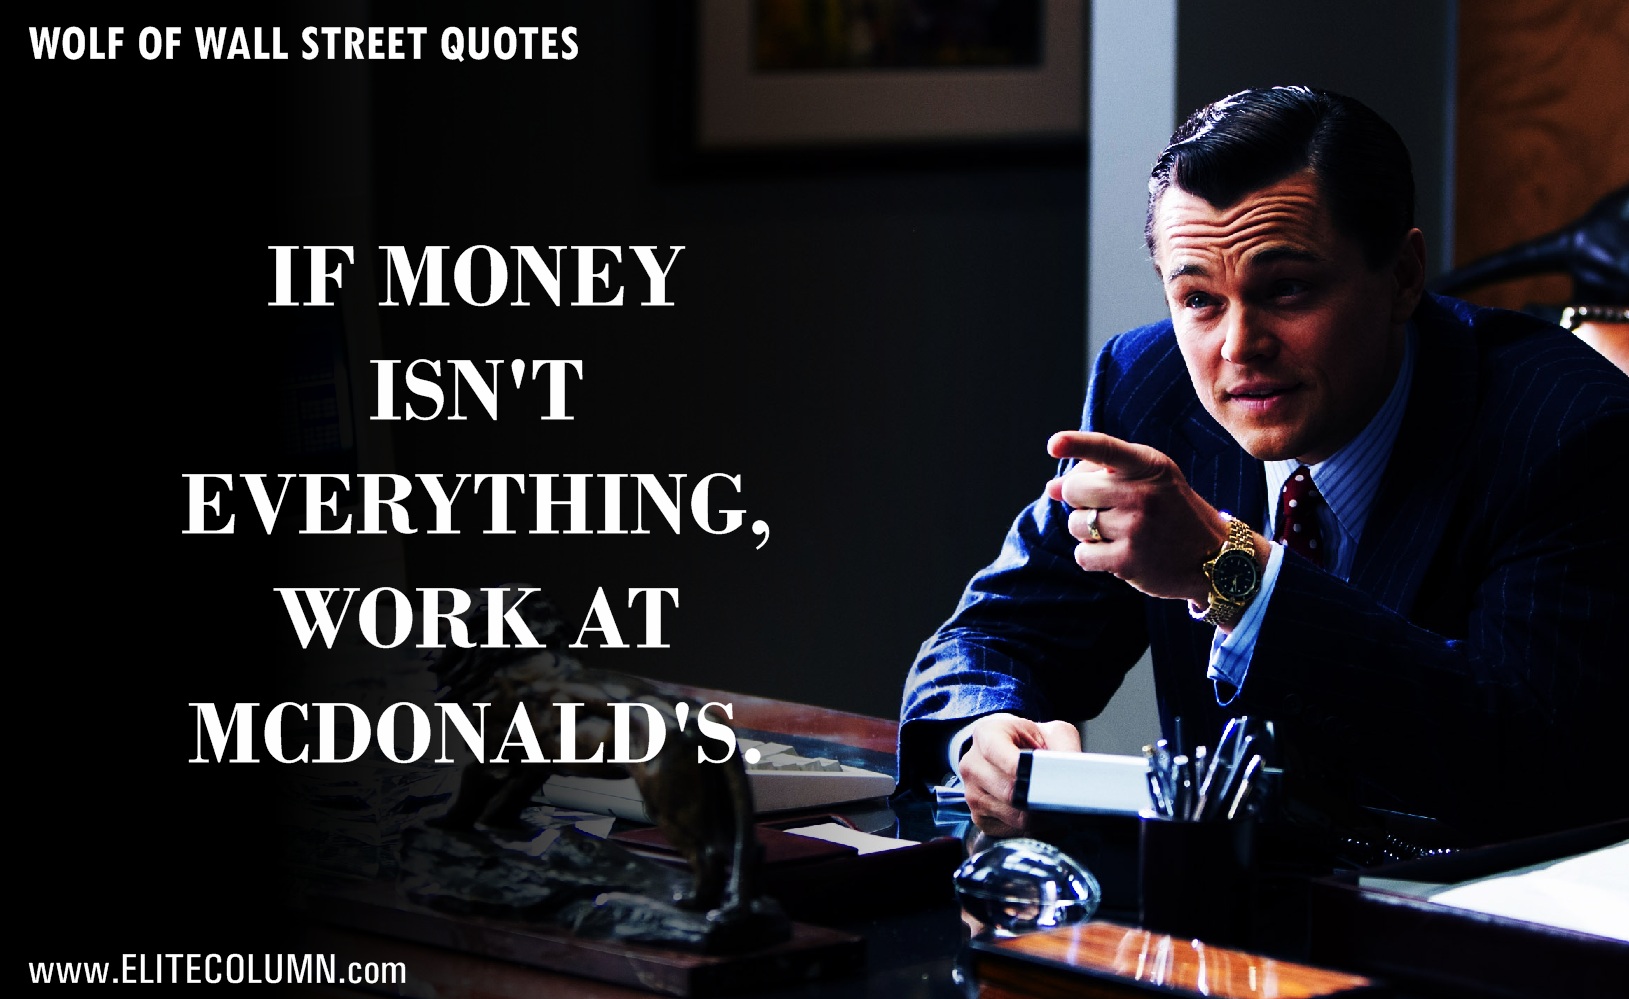 The Wolf Of Wall Street Quotes (3)